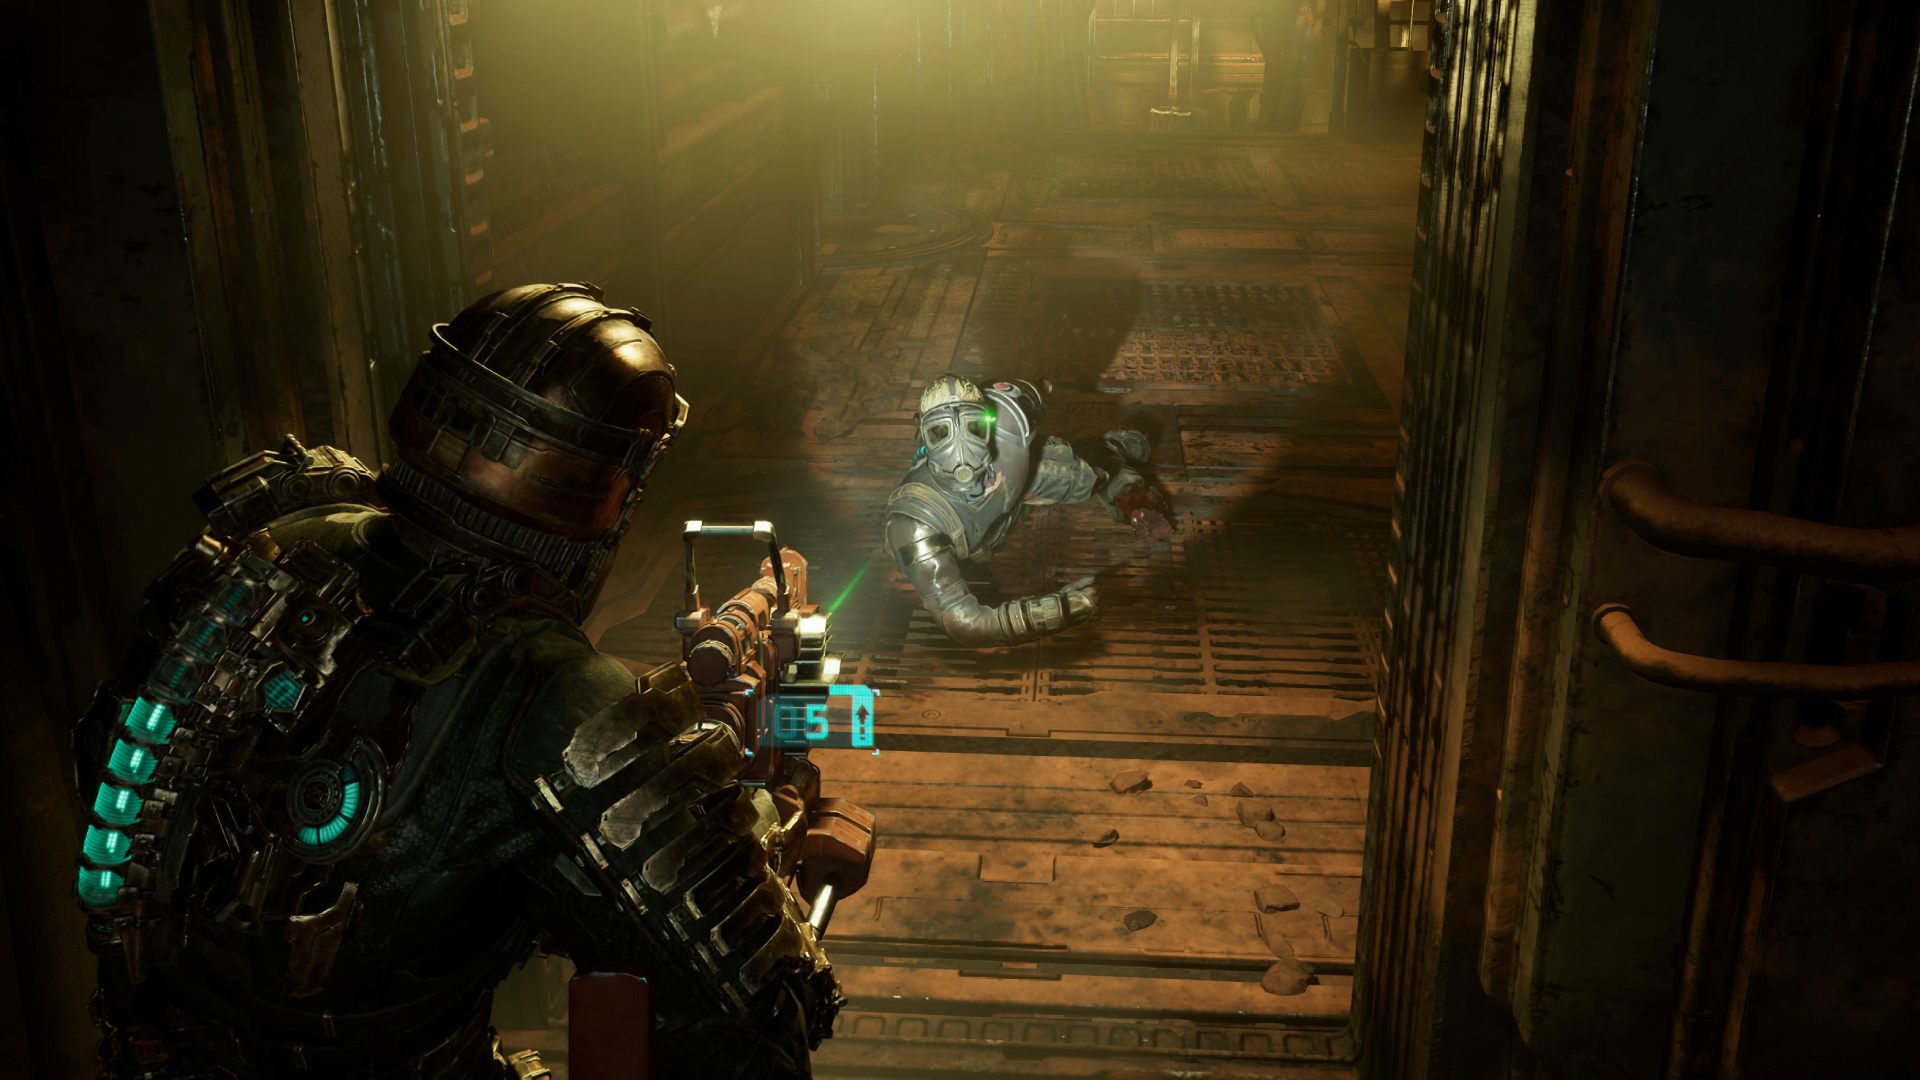 Dead Space Remake review: Isaac Clarke takes aim at a crawling body with a rifle